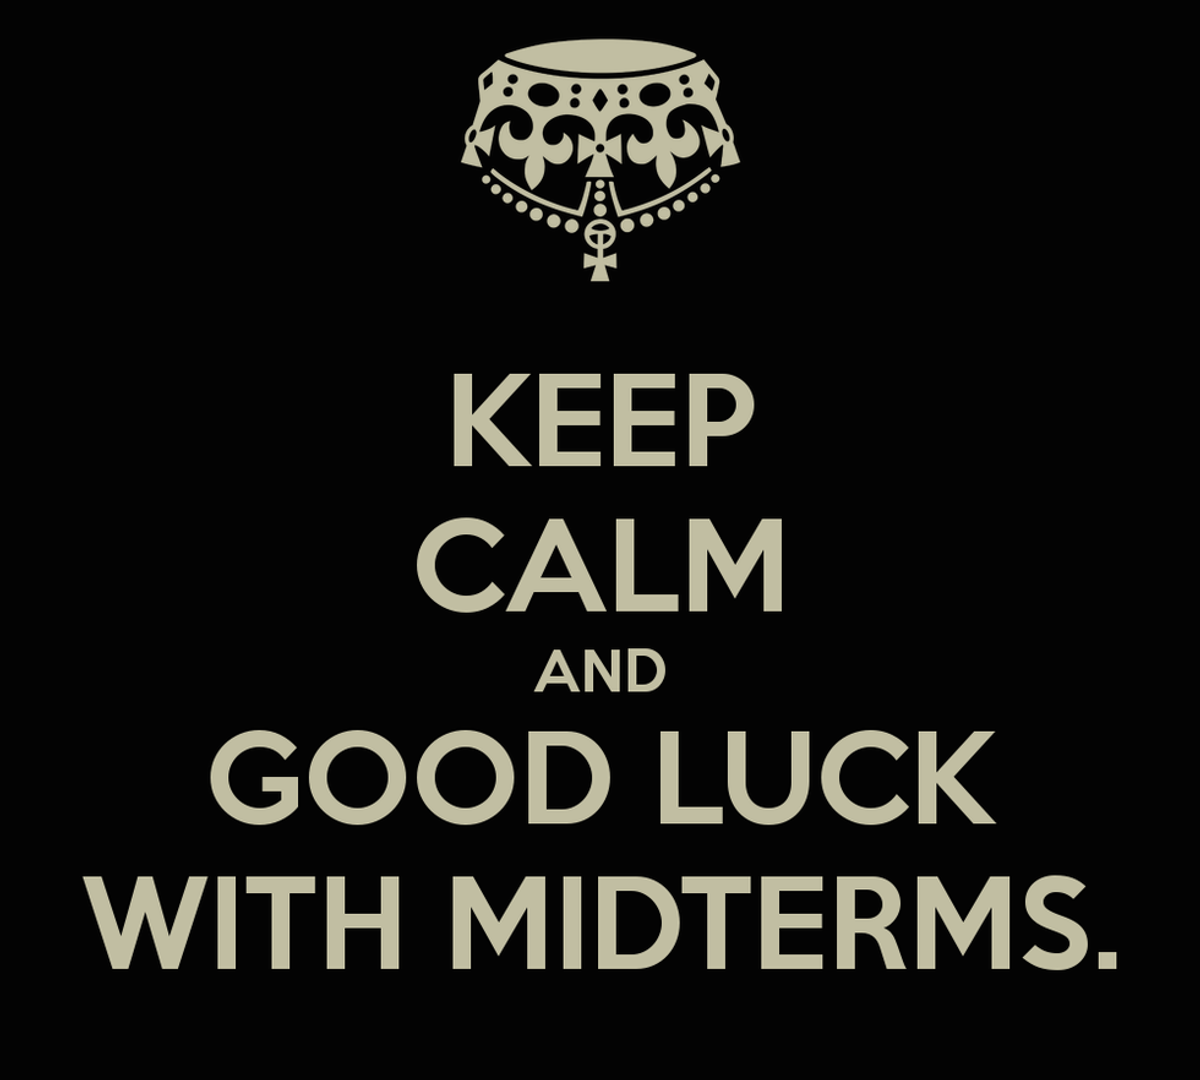 7 Tips for Surviving Midterms